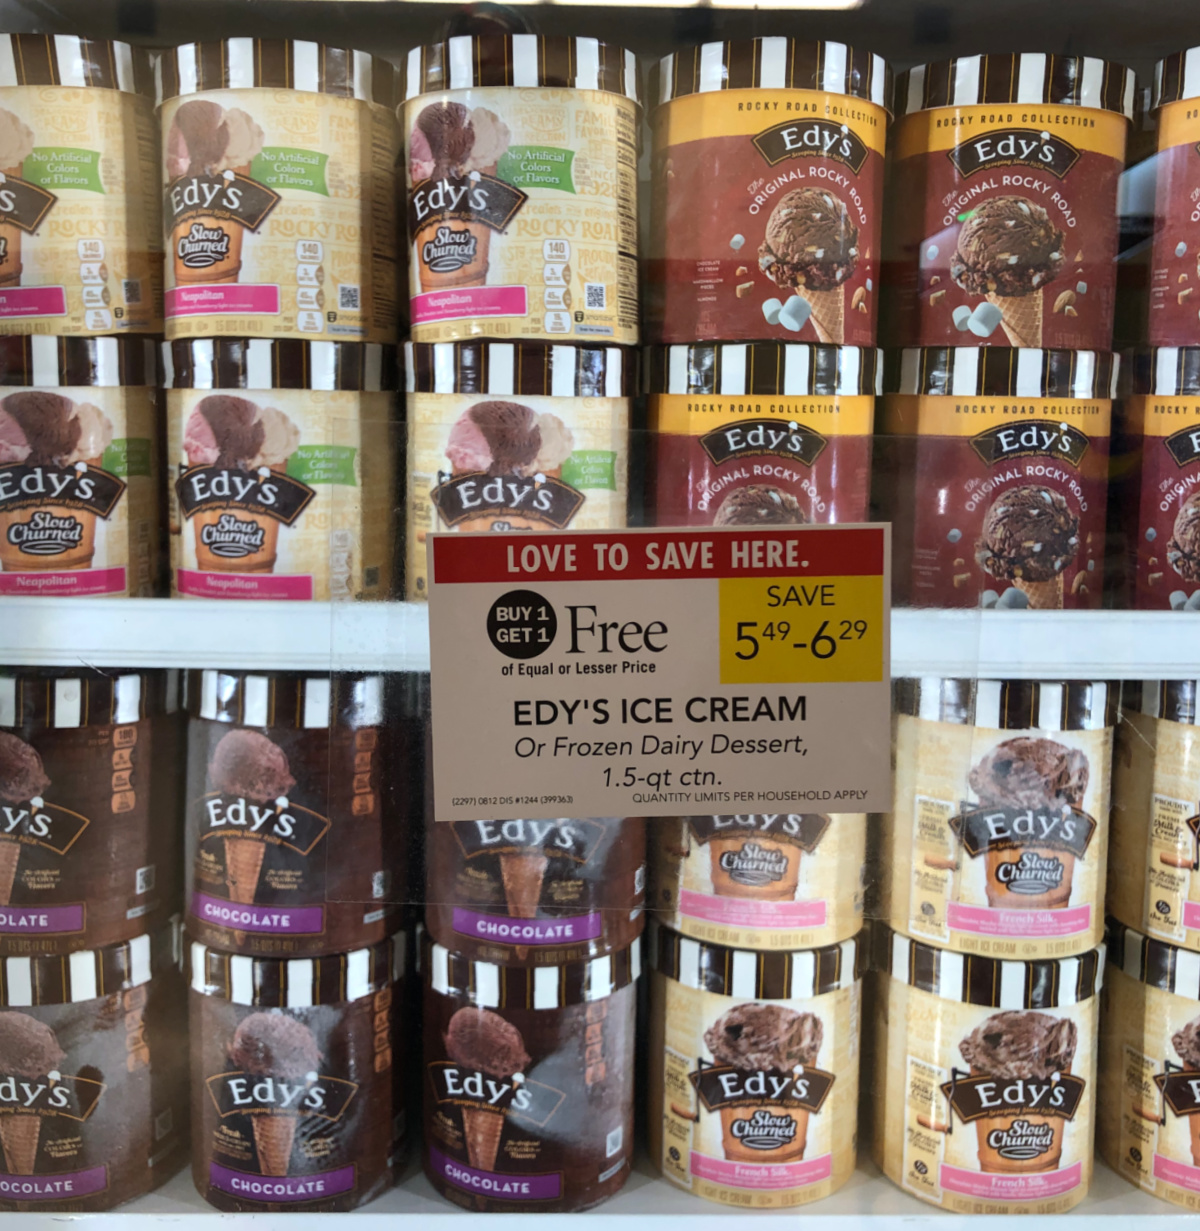 Take Advantage Of The Publix BOGO Sale On Edy’s® Ice Cream And Scoop Up Happiness! on I Heart Publix